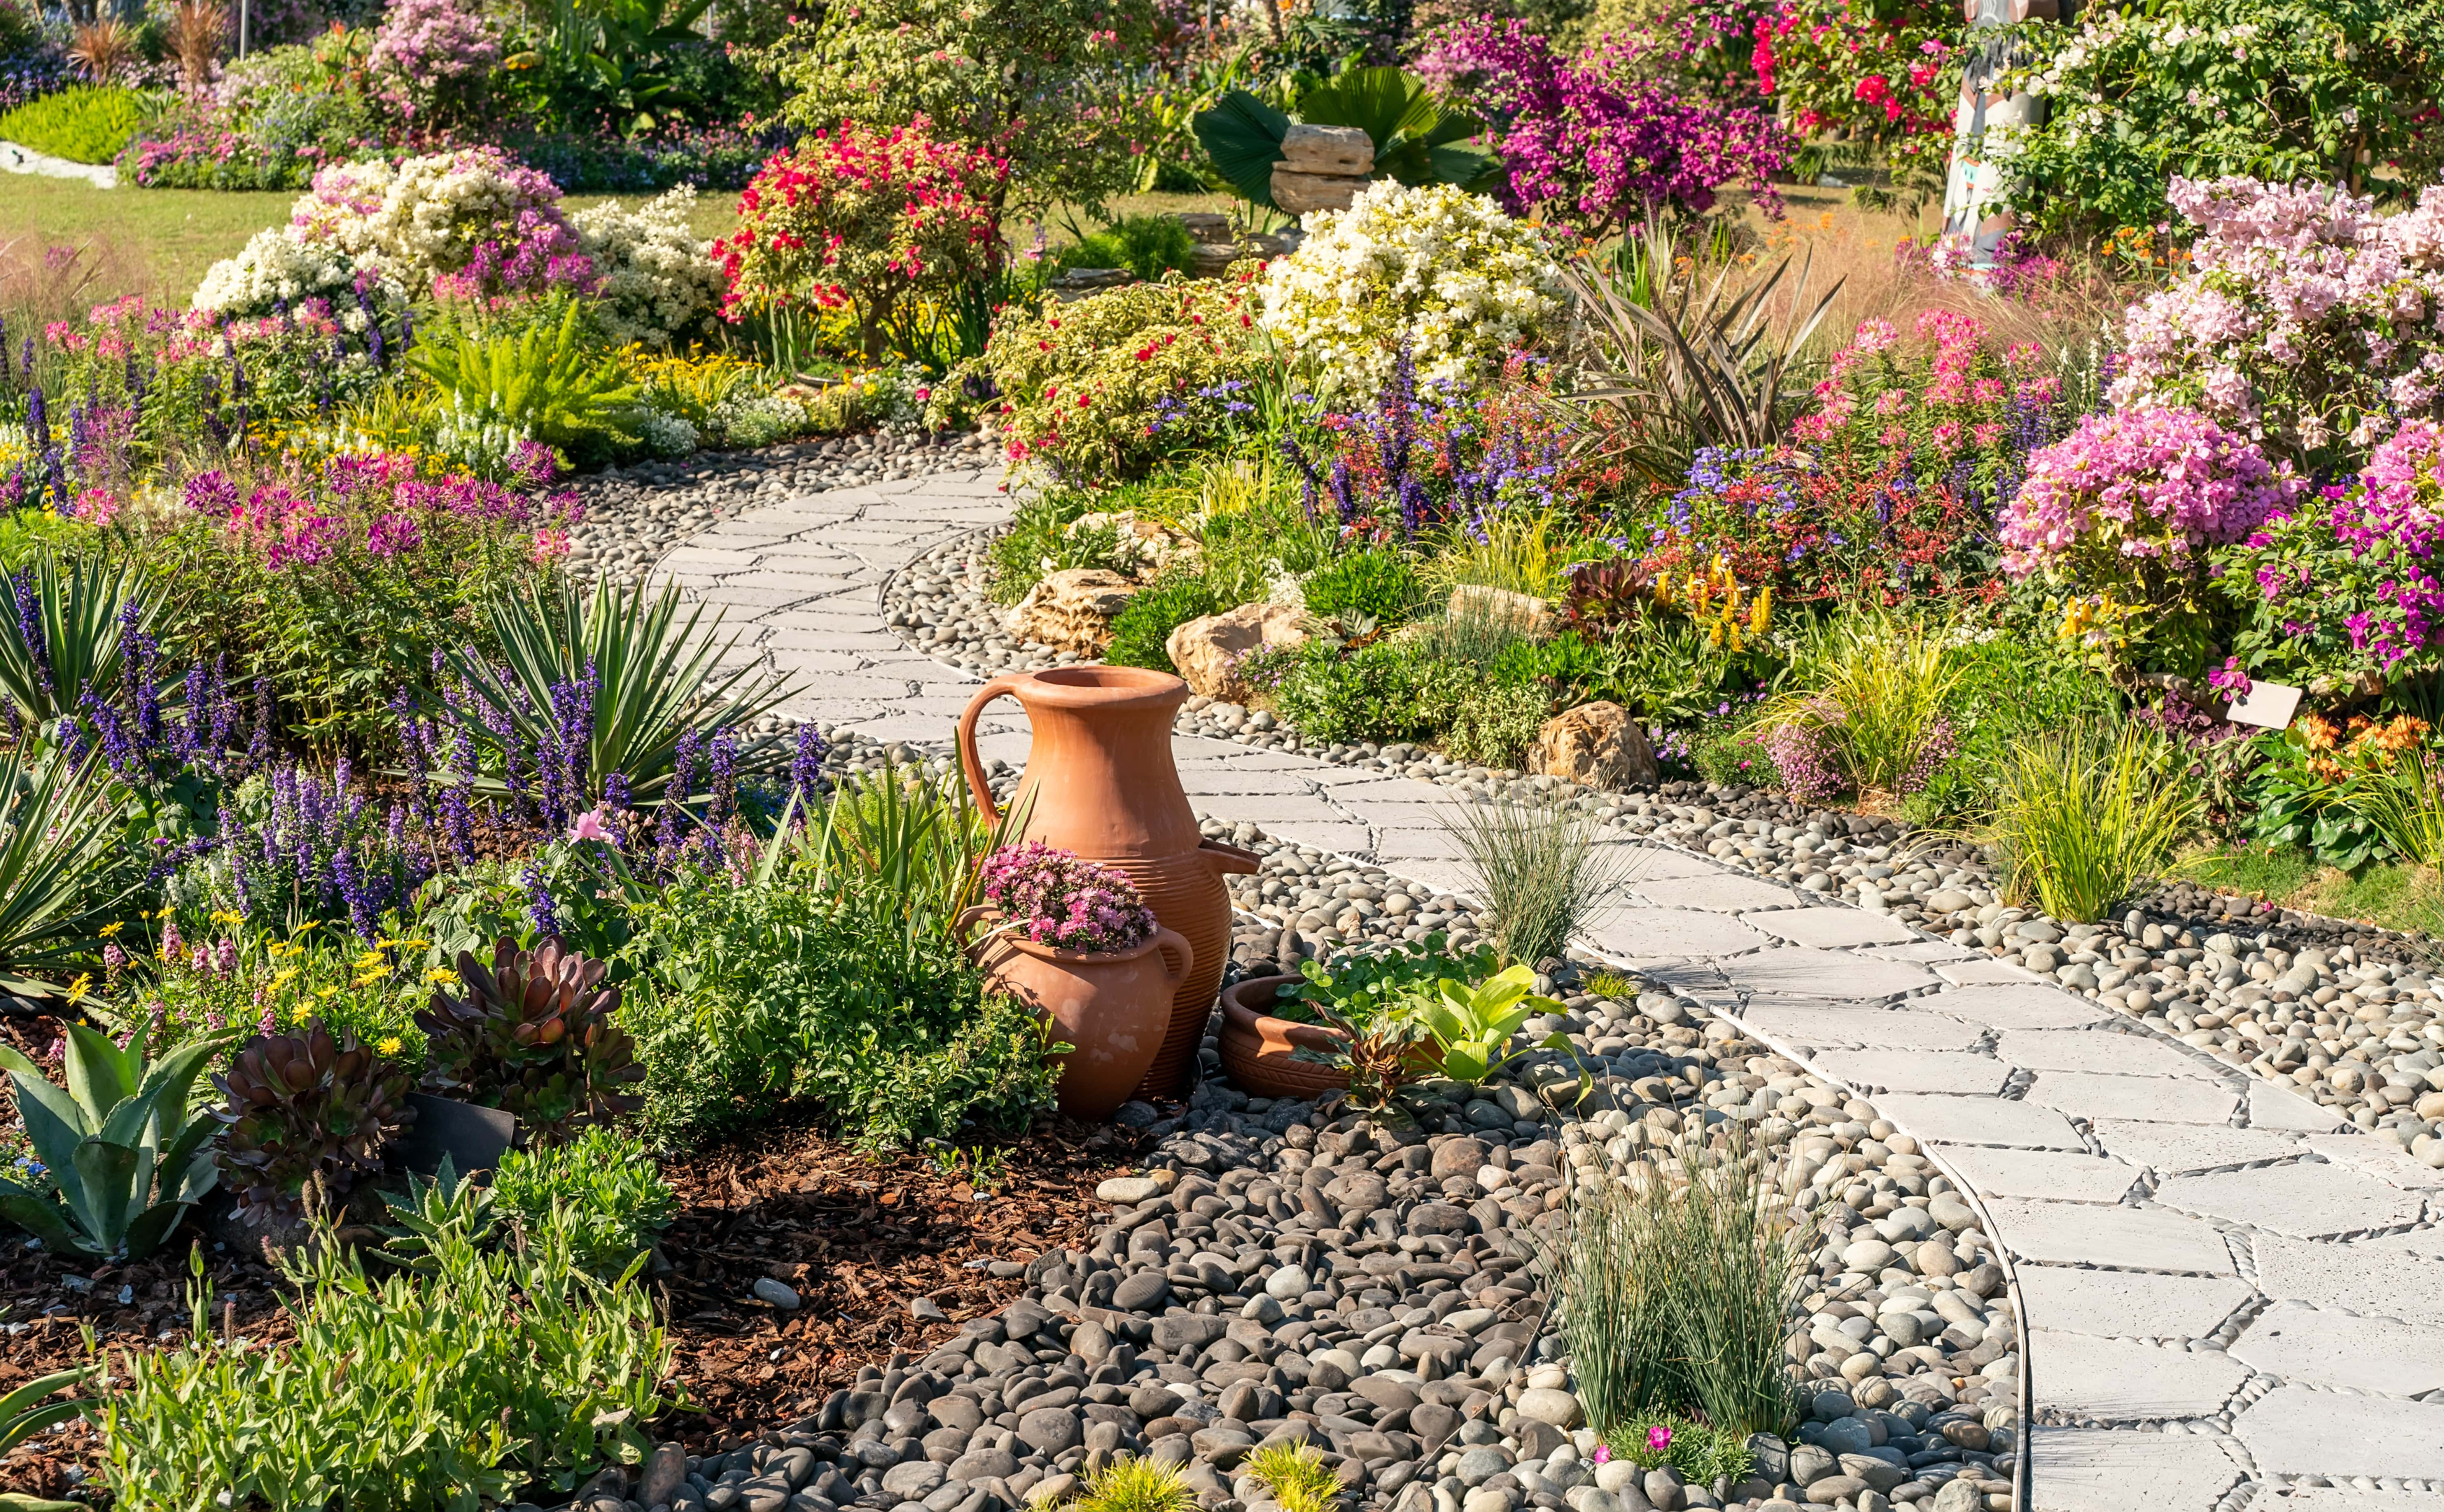 A full colorful garden with a stepping path